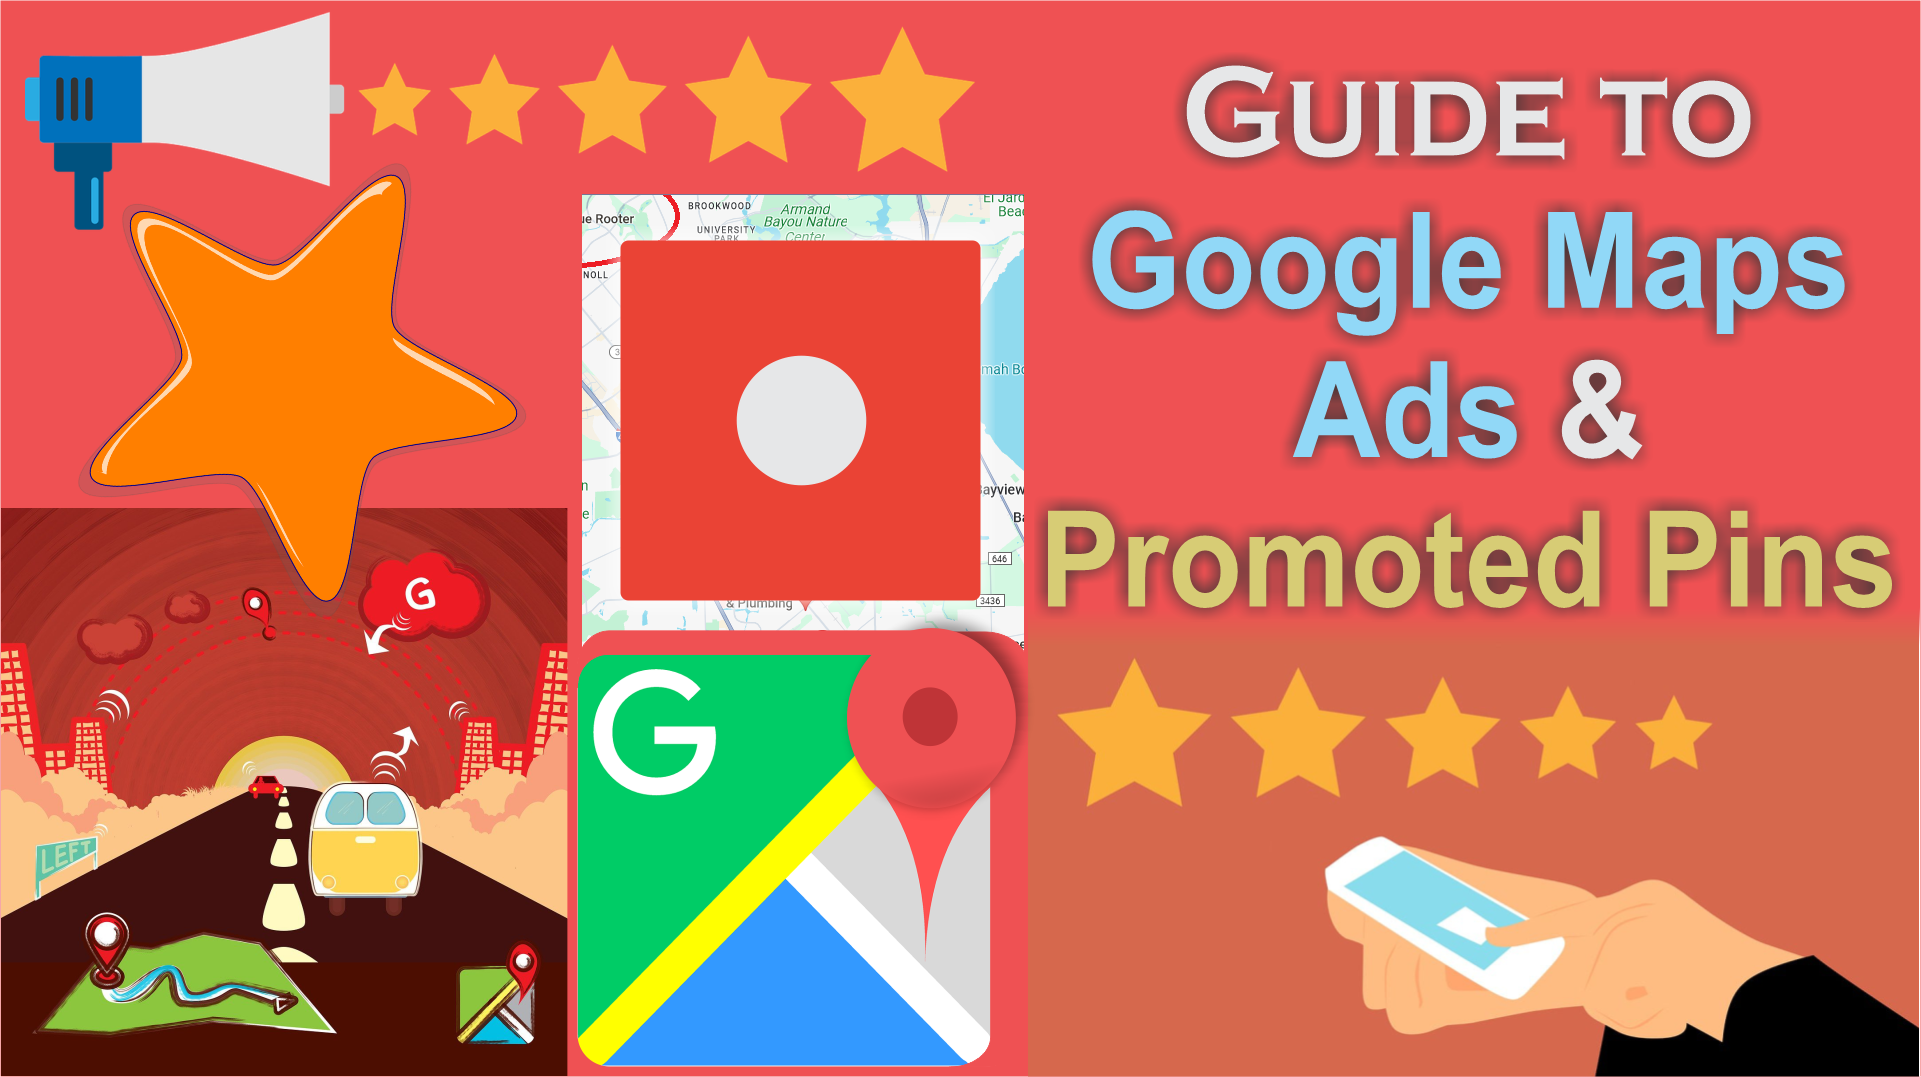 Google Maps Ads and Promoted Pins